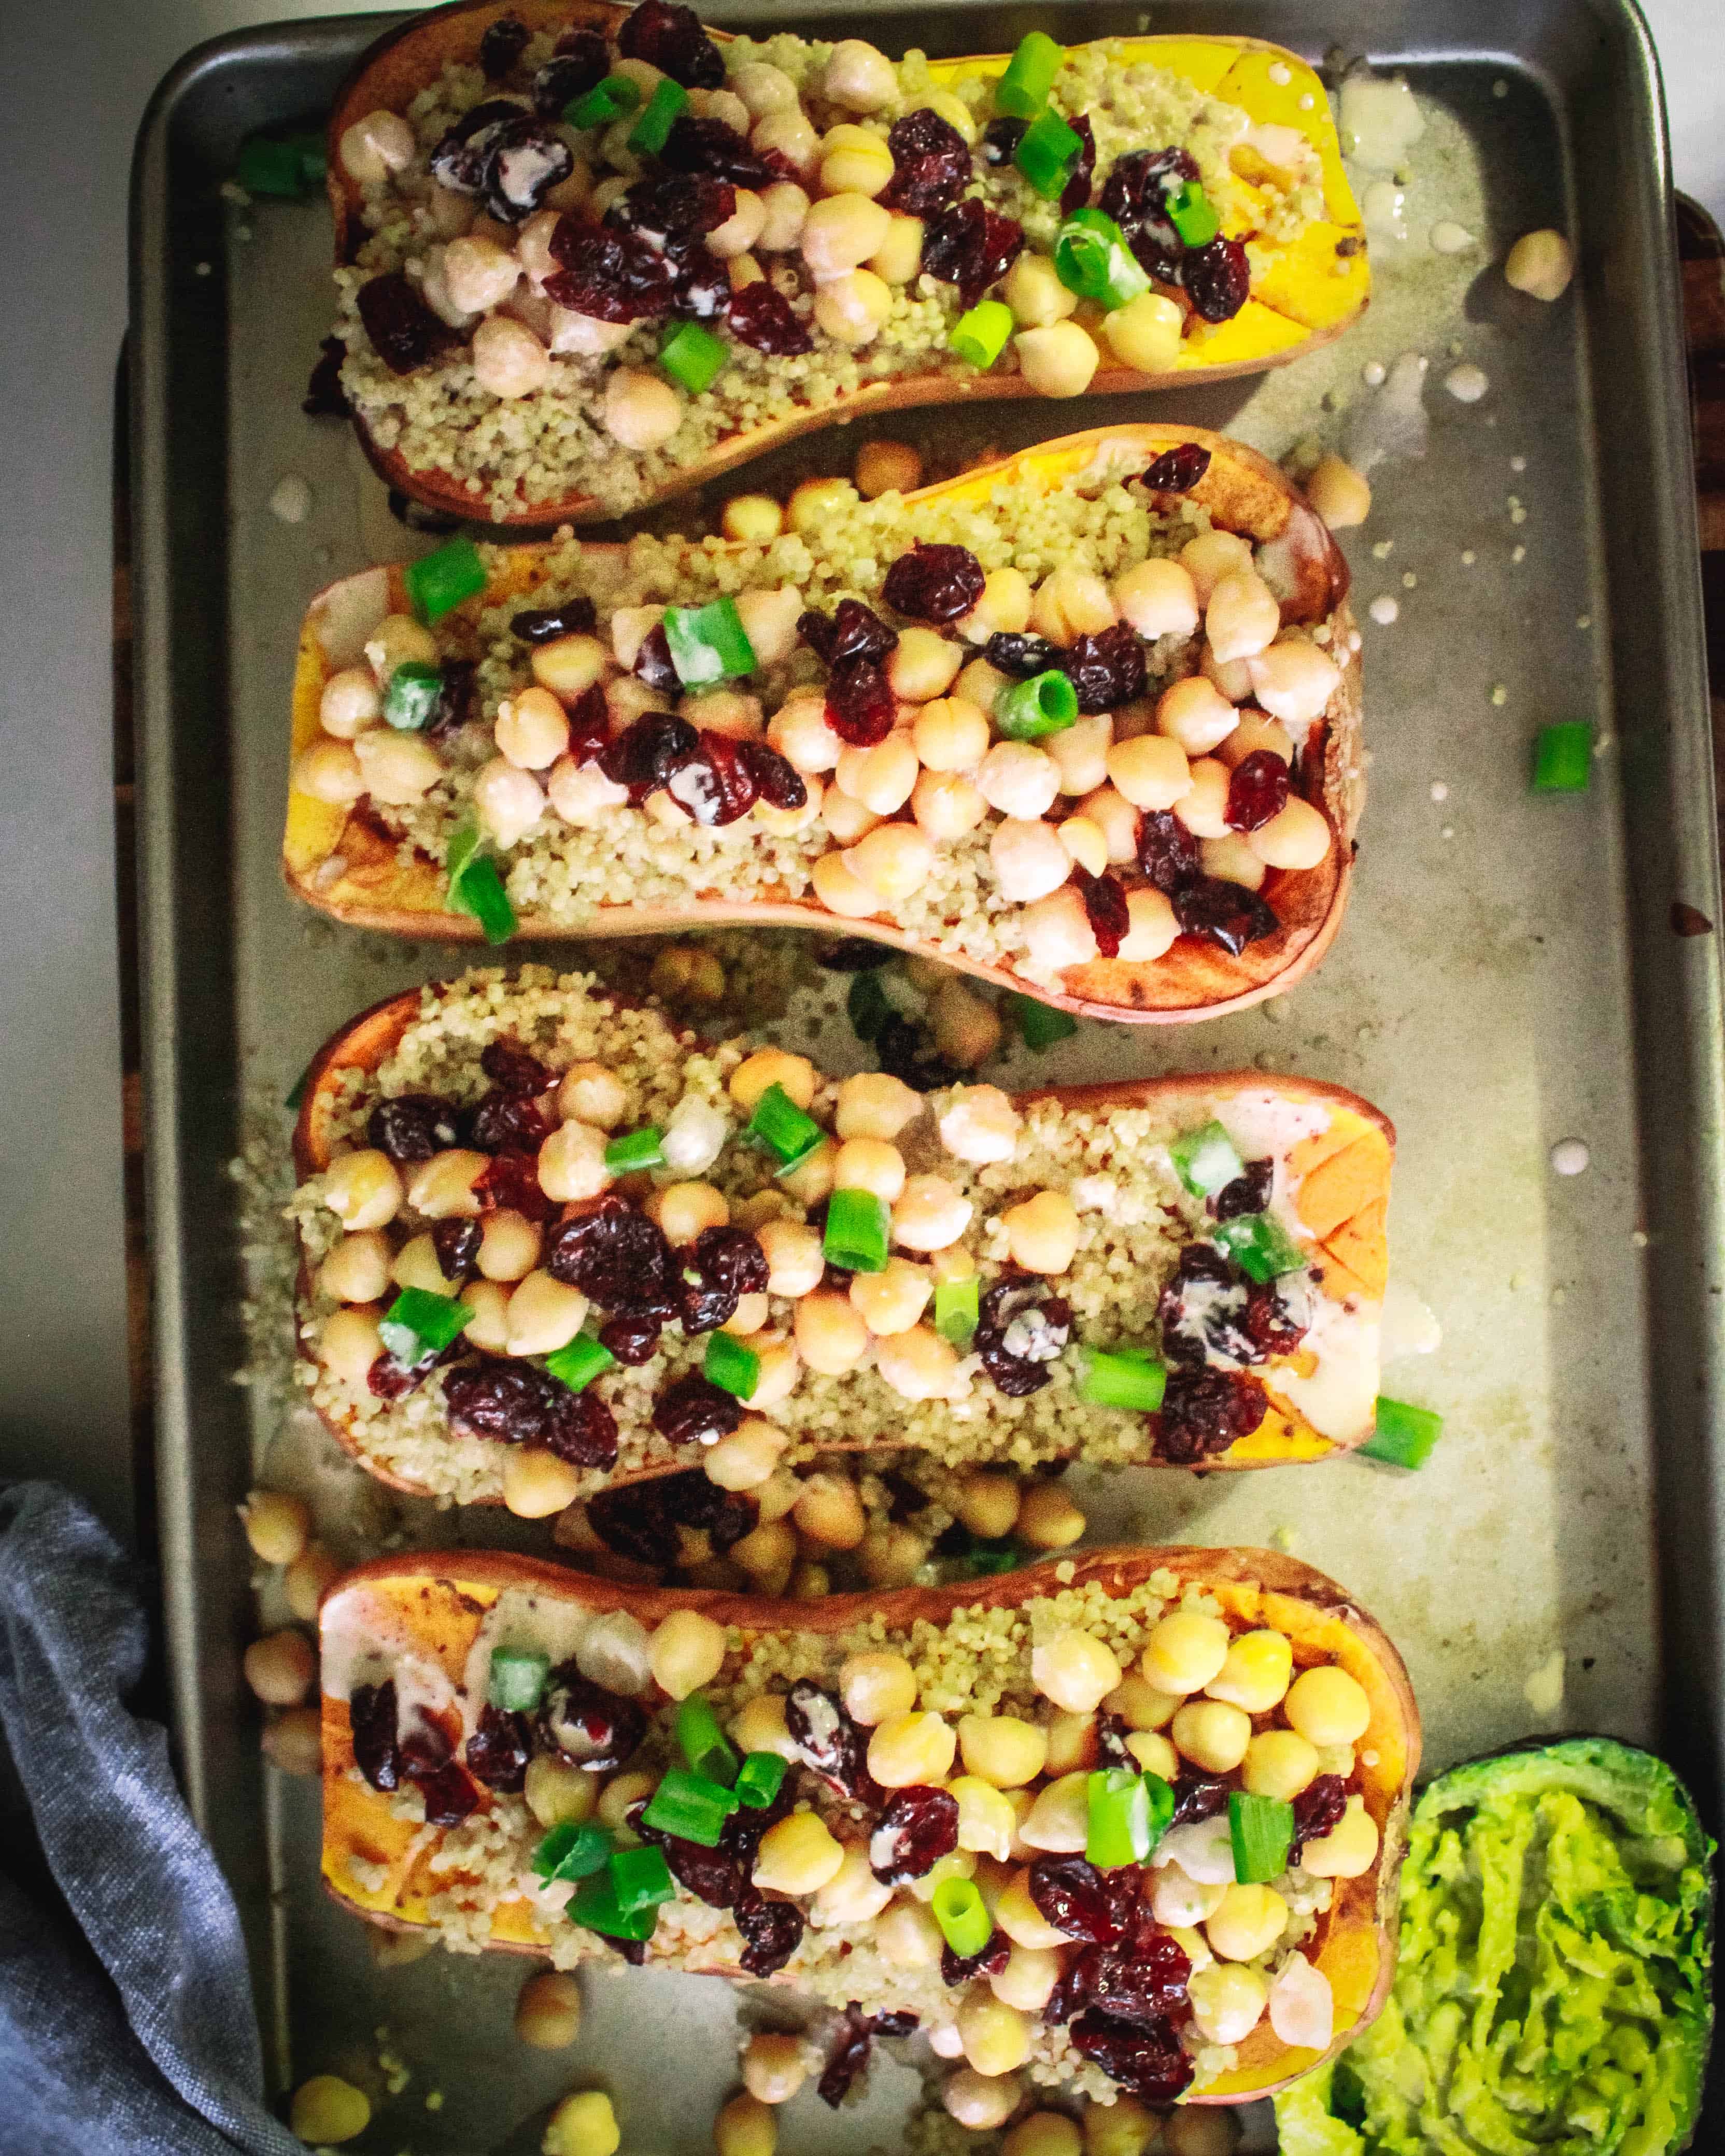 Butternut Squash halves stuffed with quinoa, cranberries, and chickpeas